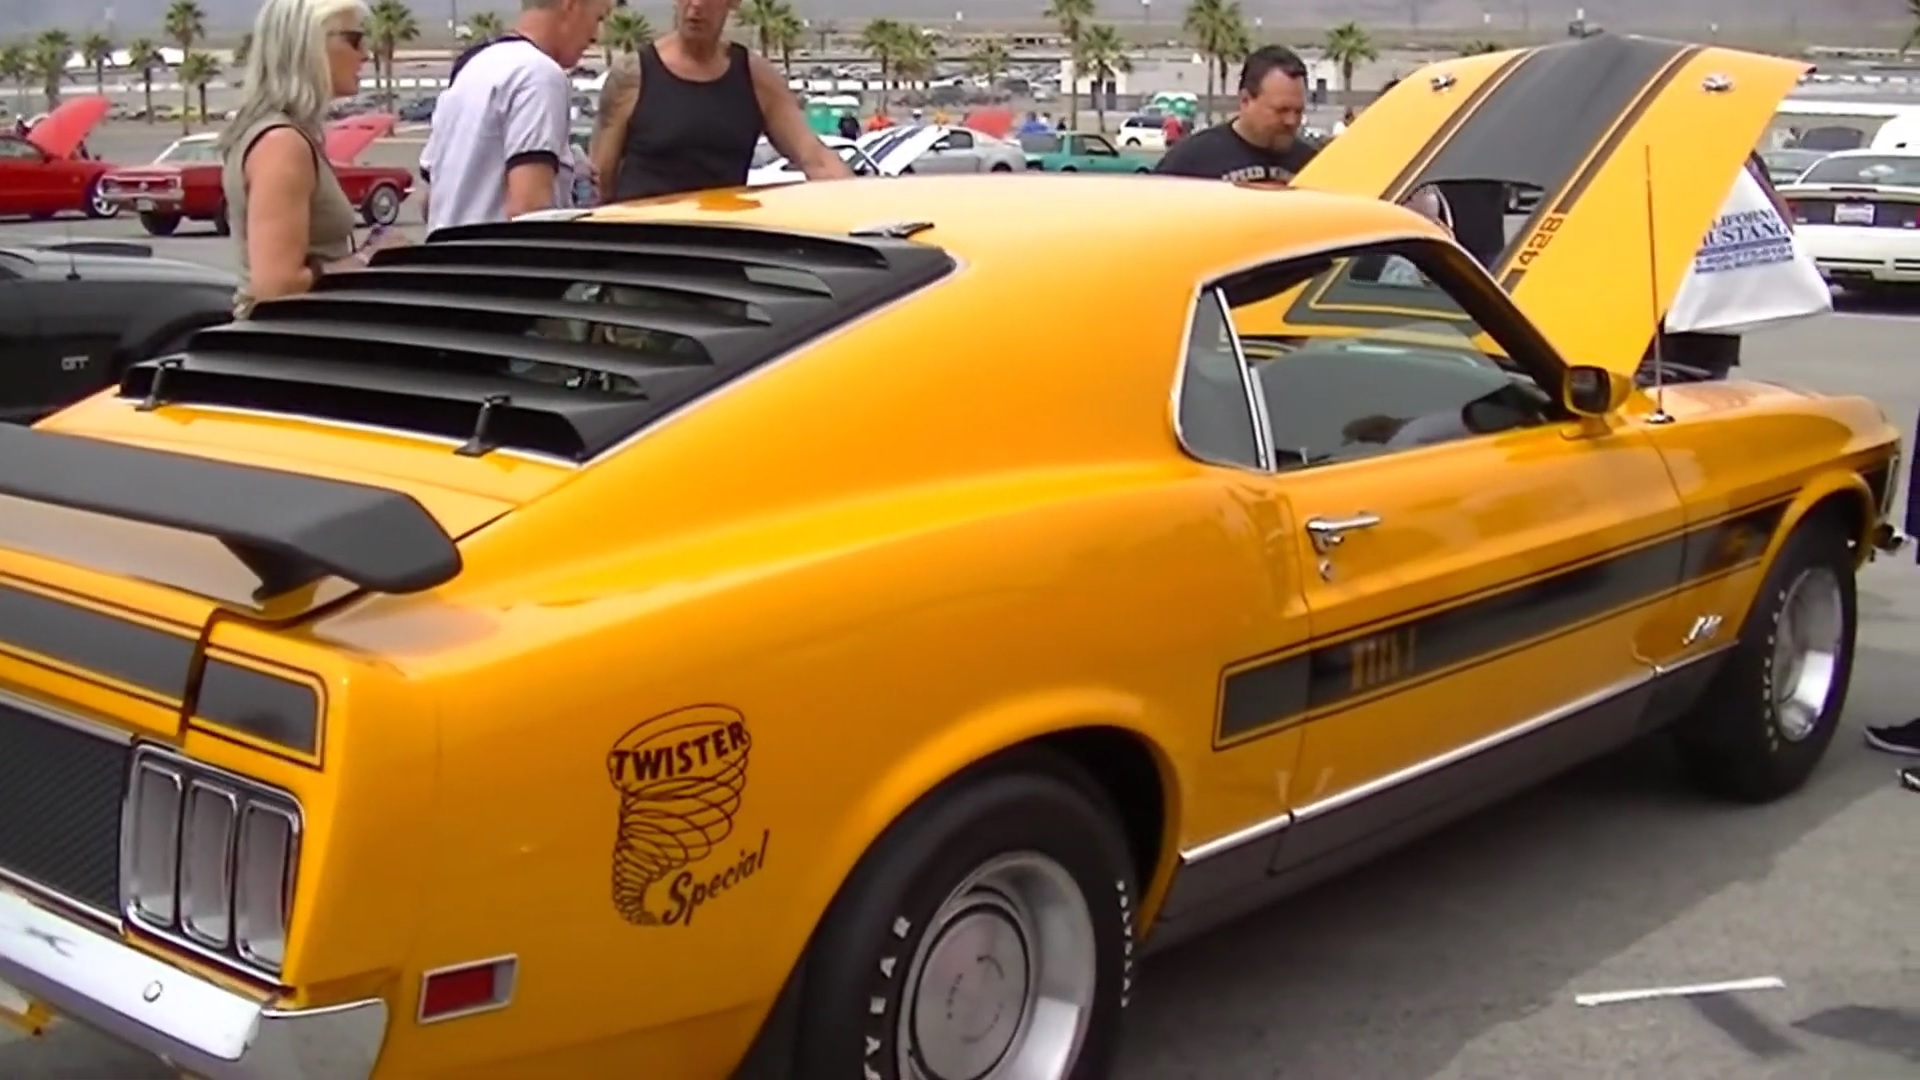 Video: Restored 1970 Ford Mustang Twister Special